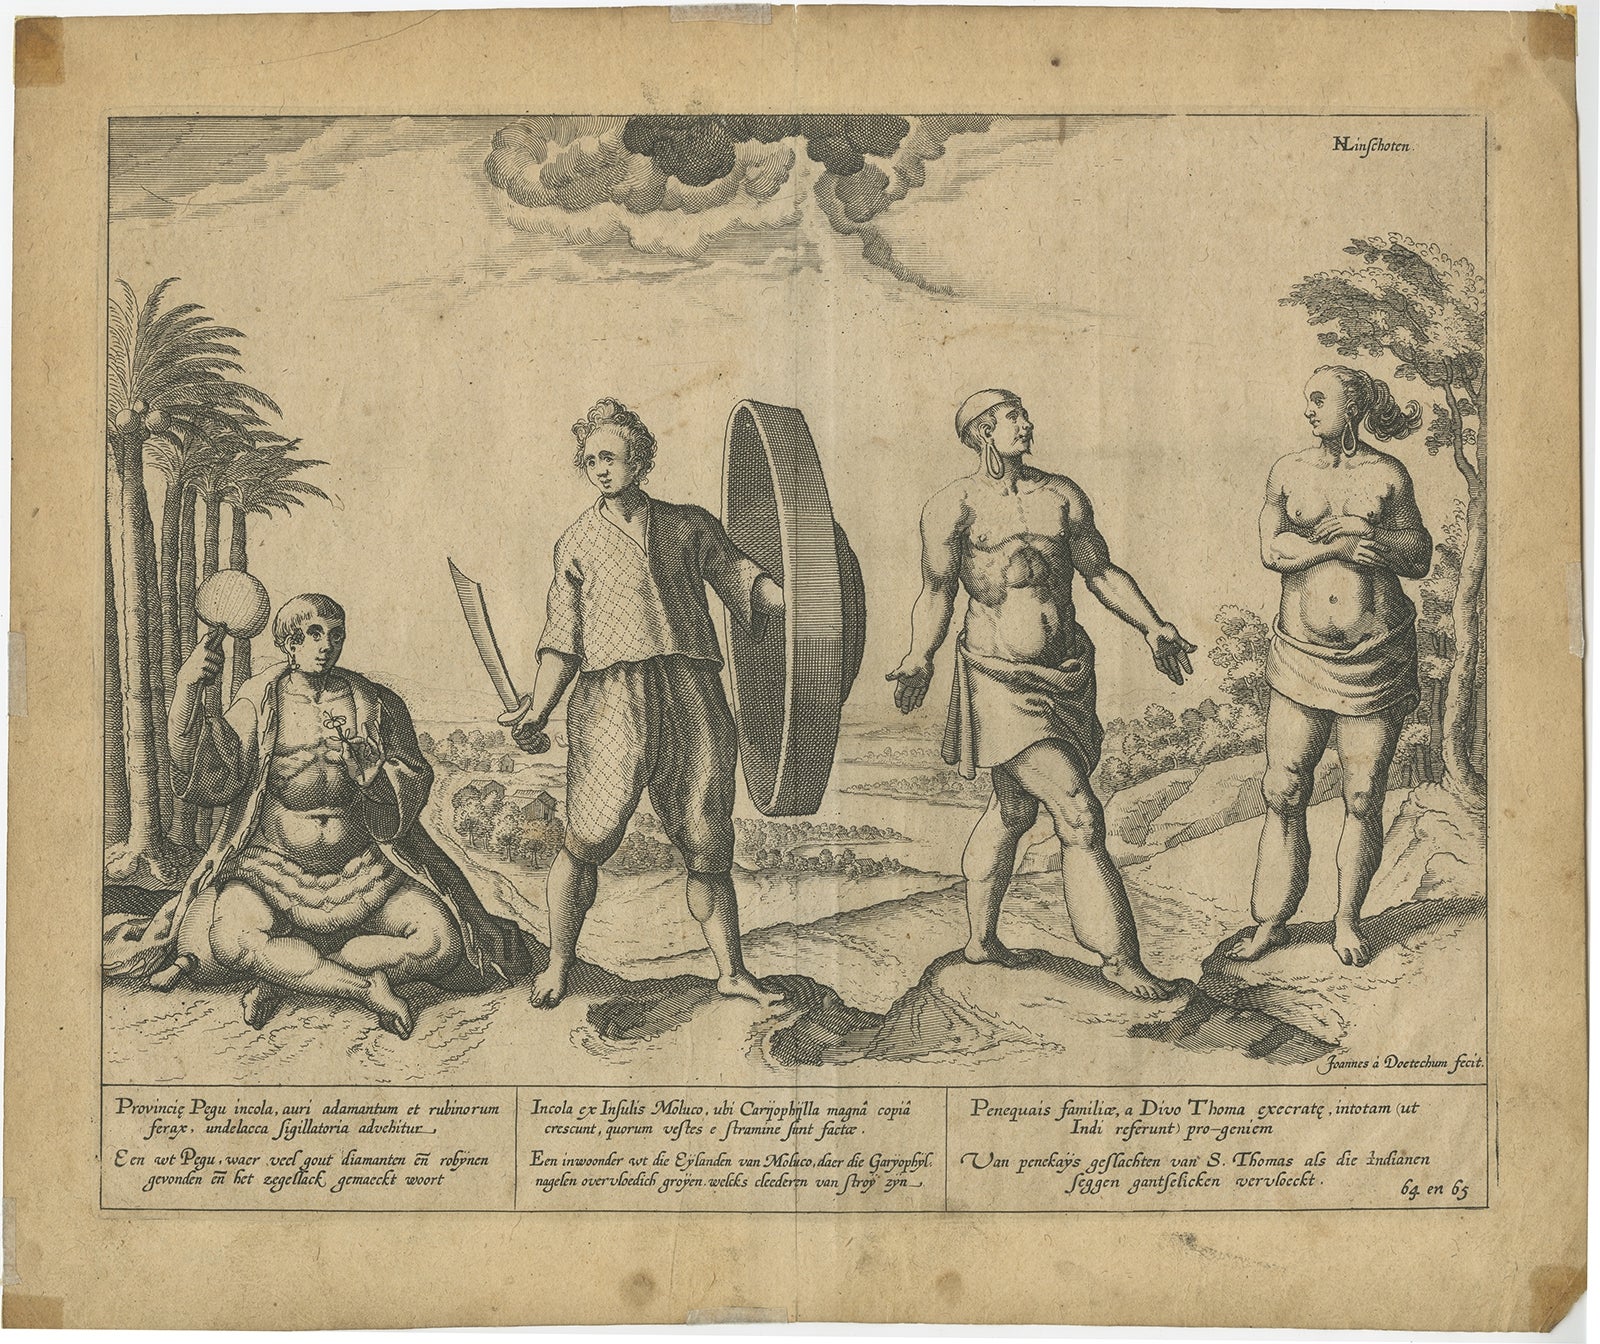 Antique print titled 'Provincie Pegu incola (..) - Incola ex Insulis Moluco (..) - Penequais familiae (..)'. 

Old print showing various figures including a man from Pegu, a man from the Moluccan islands, Penequais indians and inhabitants of S.